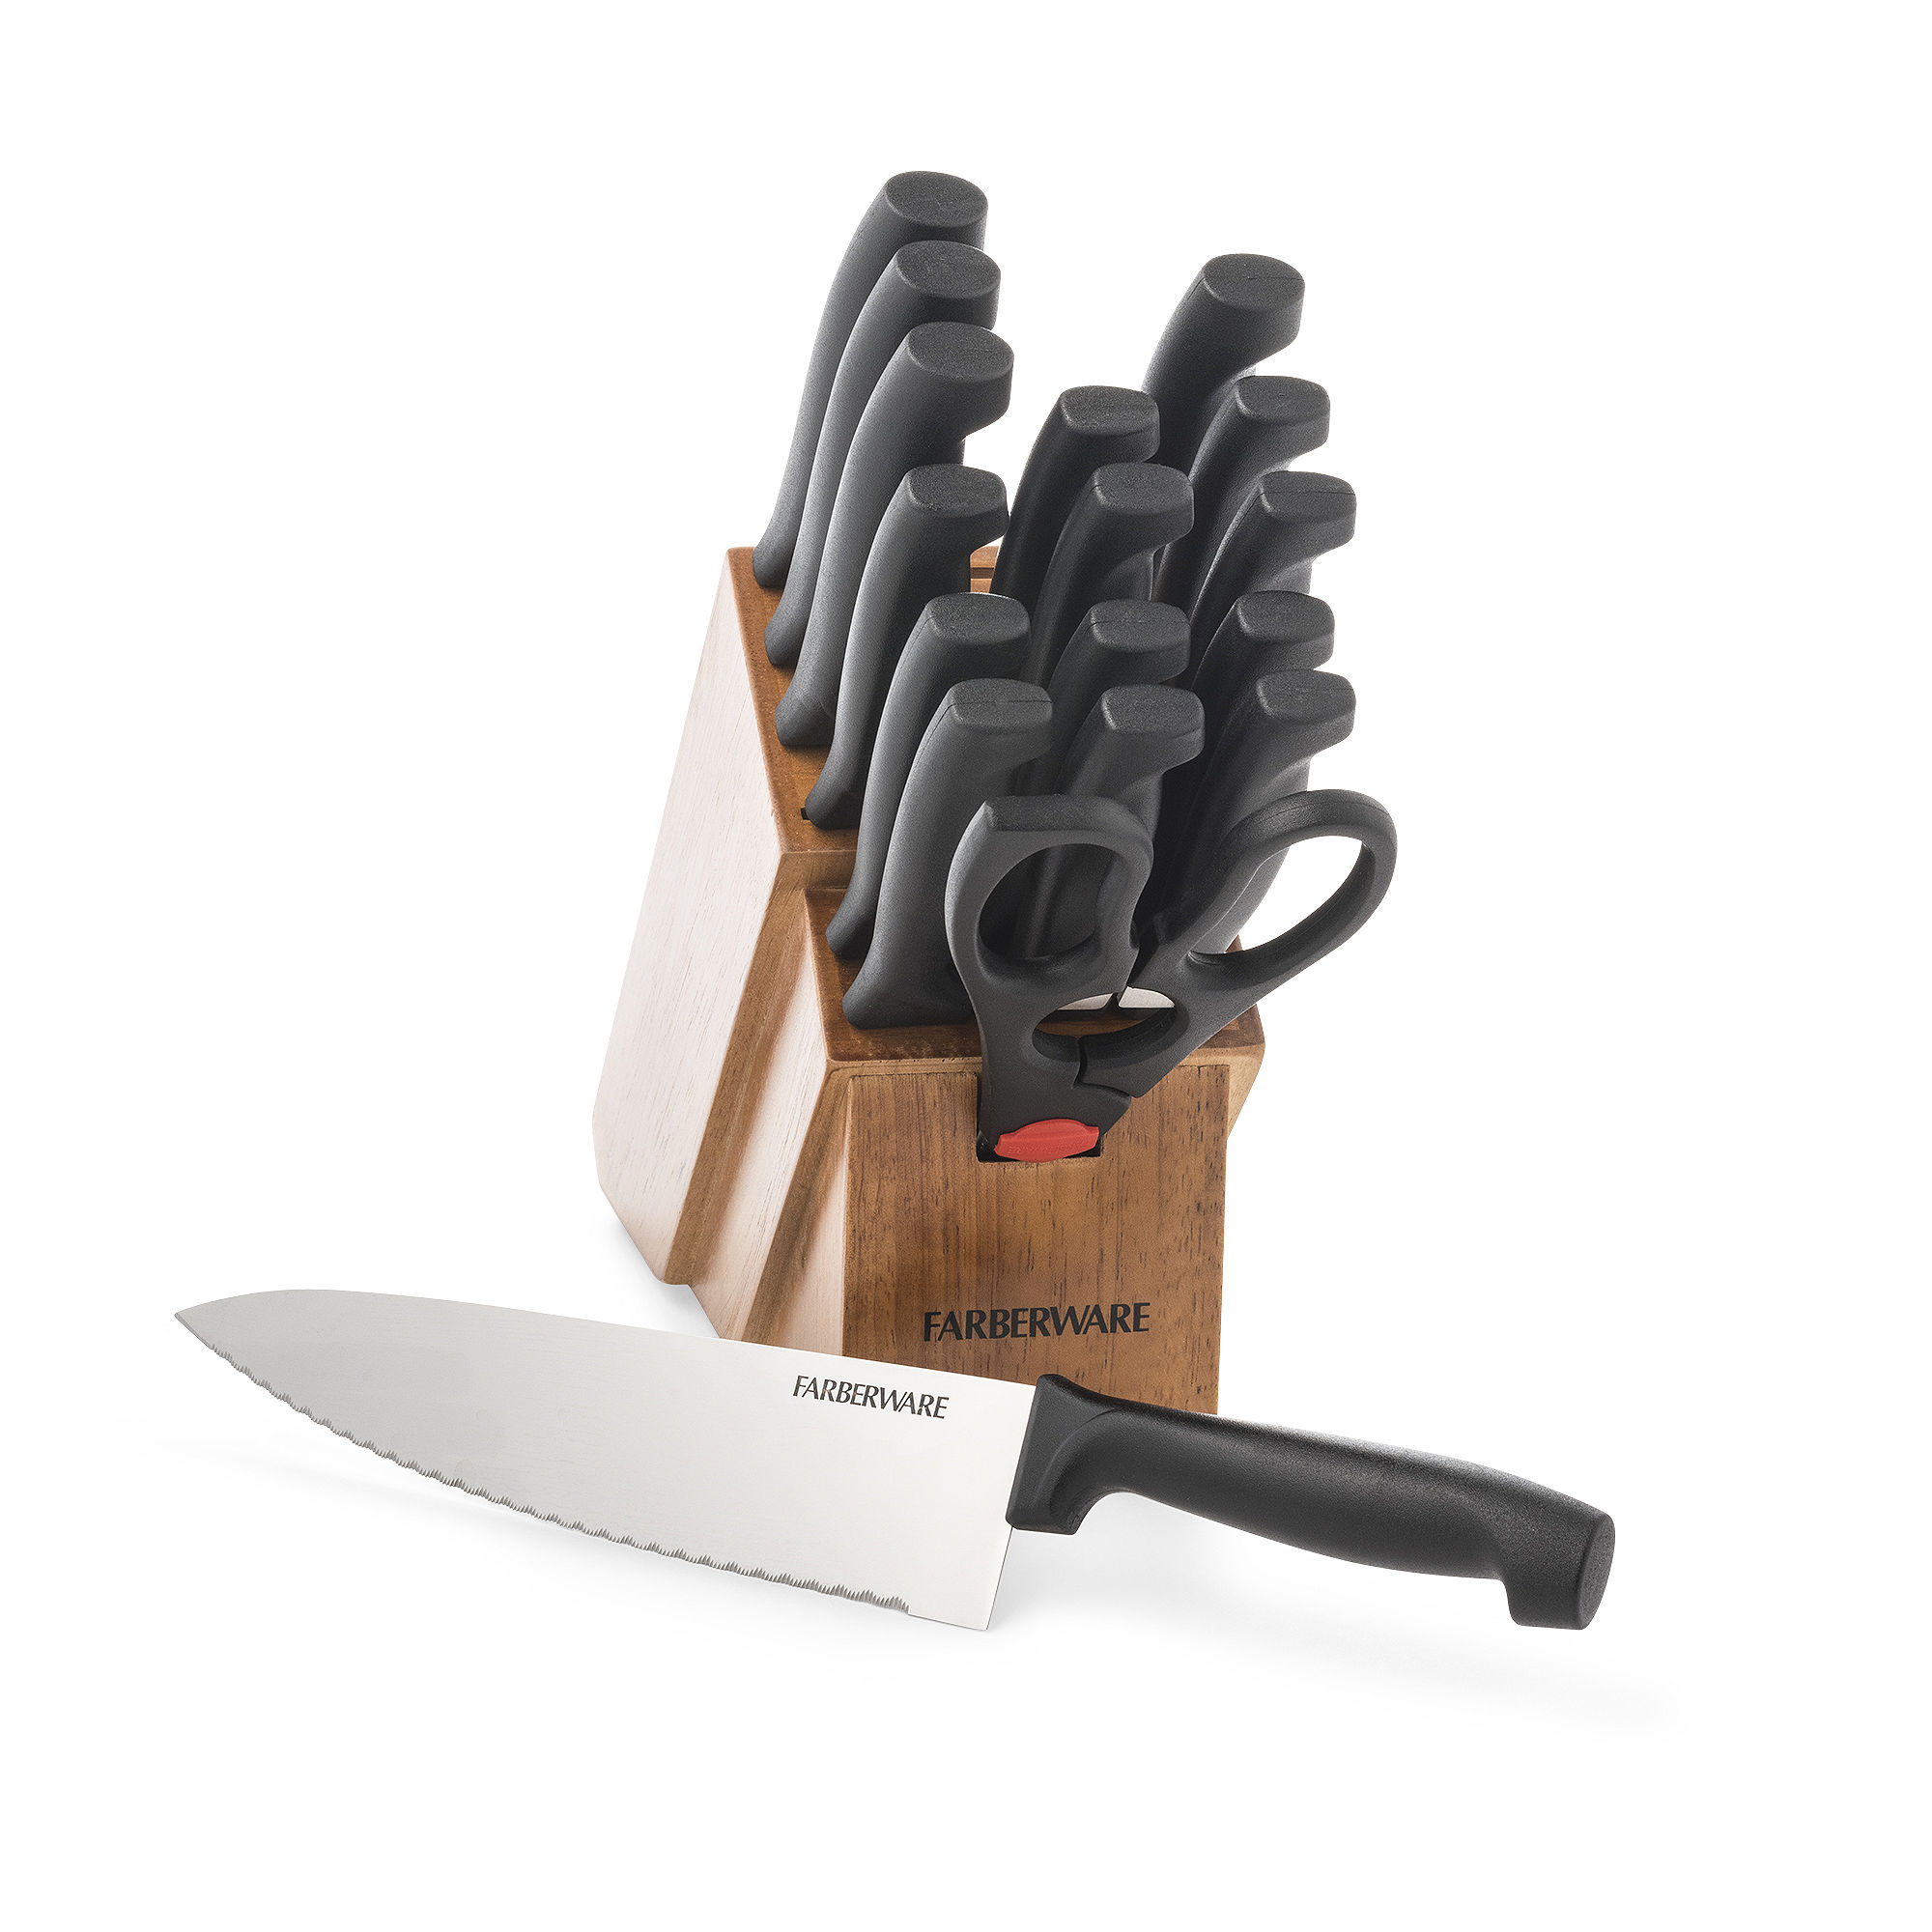 Farberware 18 Piece Never Needs Sharpening Stainless Steel Knife Set with Block Natural Wood - image 3 of 16